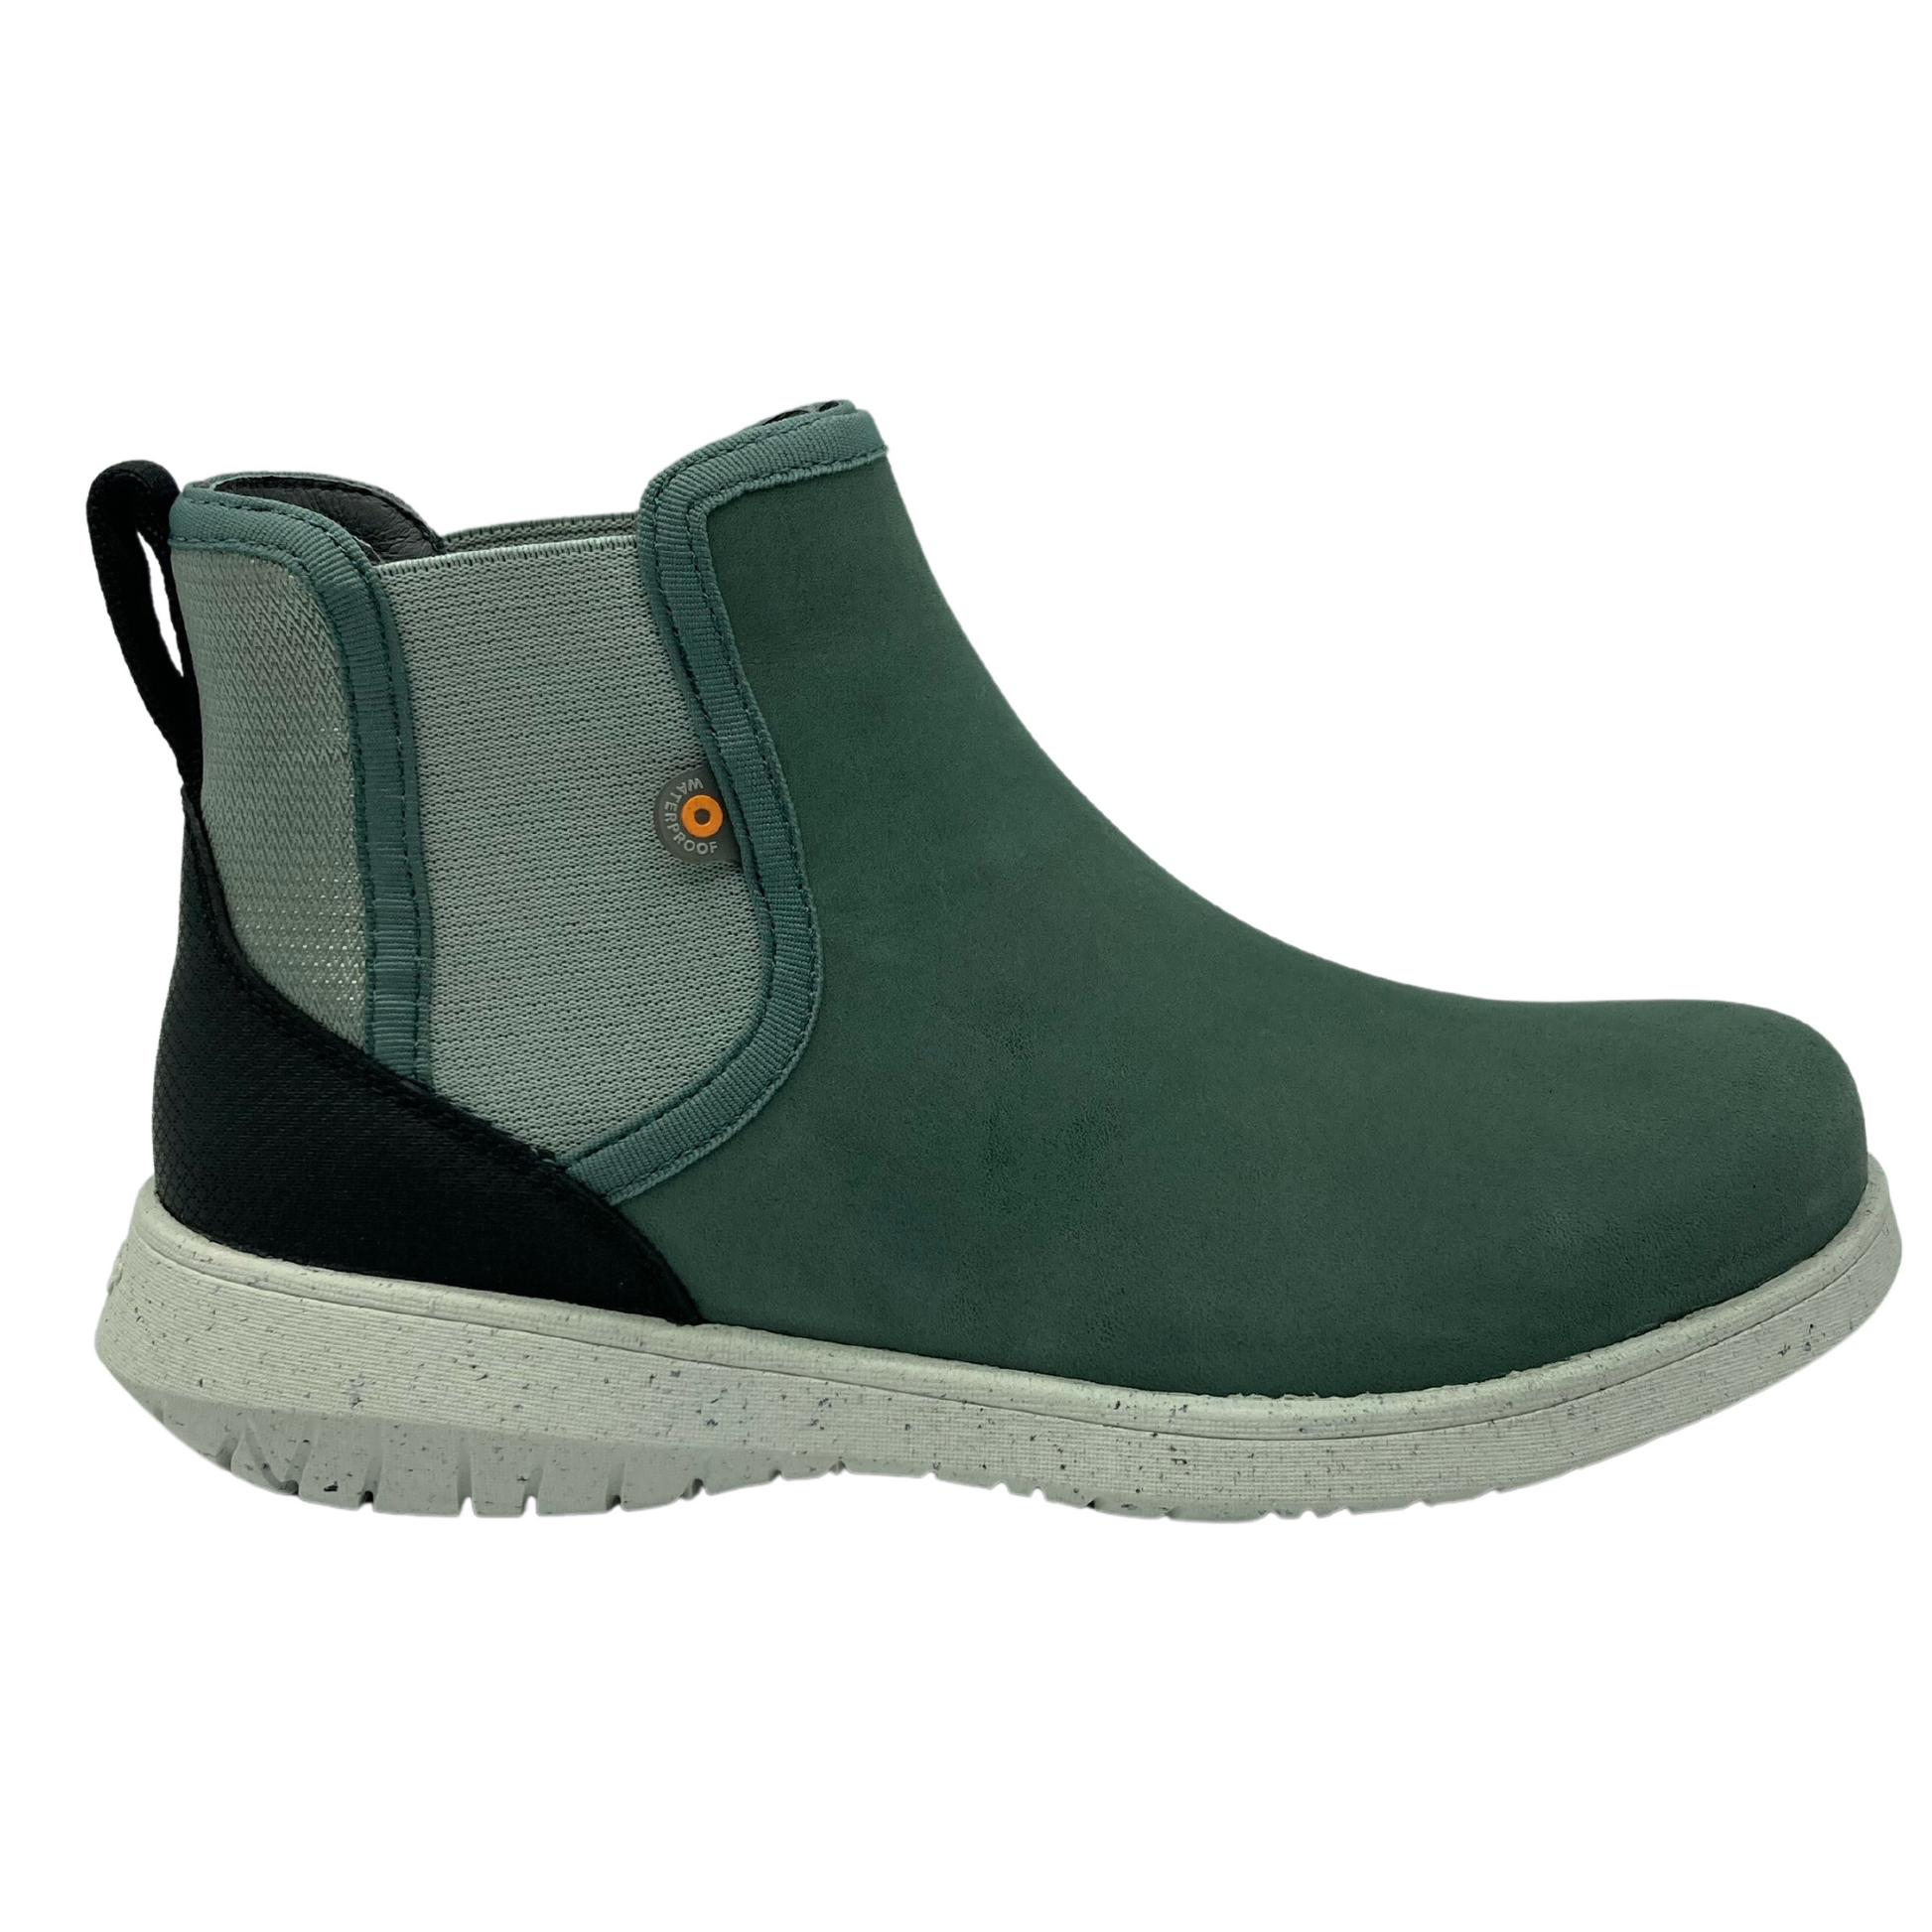 Right facing view of light green leather short boot with elastic side gores and white outsole